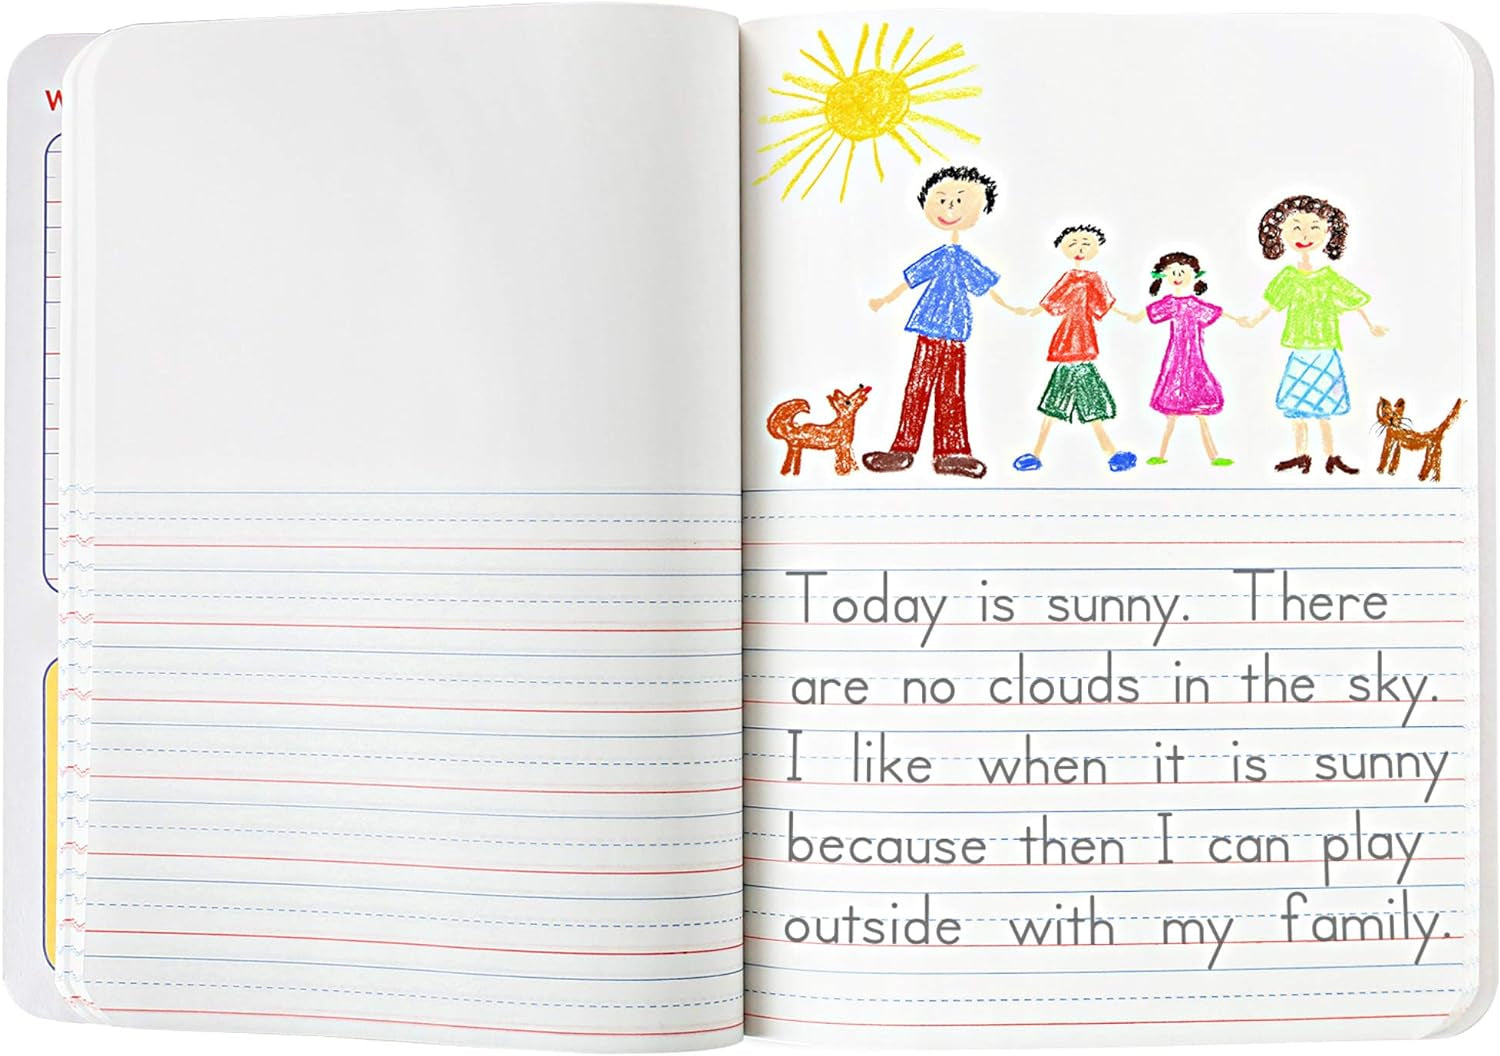 Primary Journal Kindergarten Writing Tablet 6 Pack of Primary Composition Notebook Colors May Vary for Grades K- 2, 100 Sheets (200 Pages) Creative Story Notebooks for Kids 9 3/4 in by 7 1/2 In.